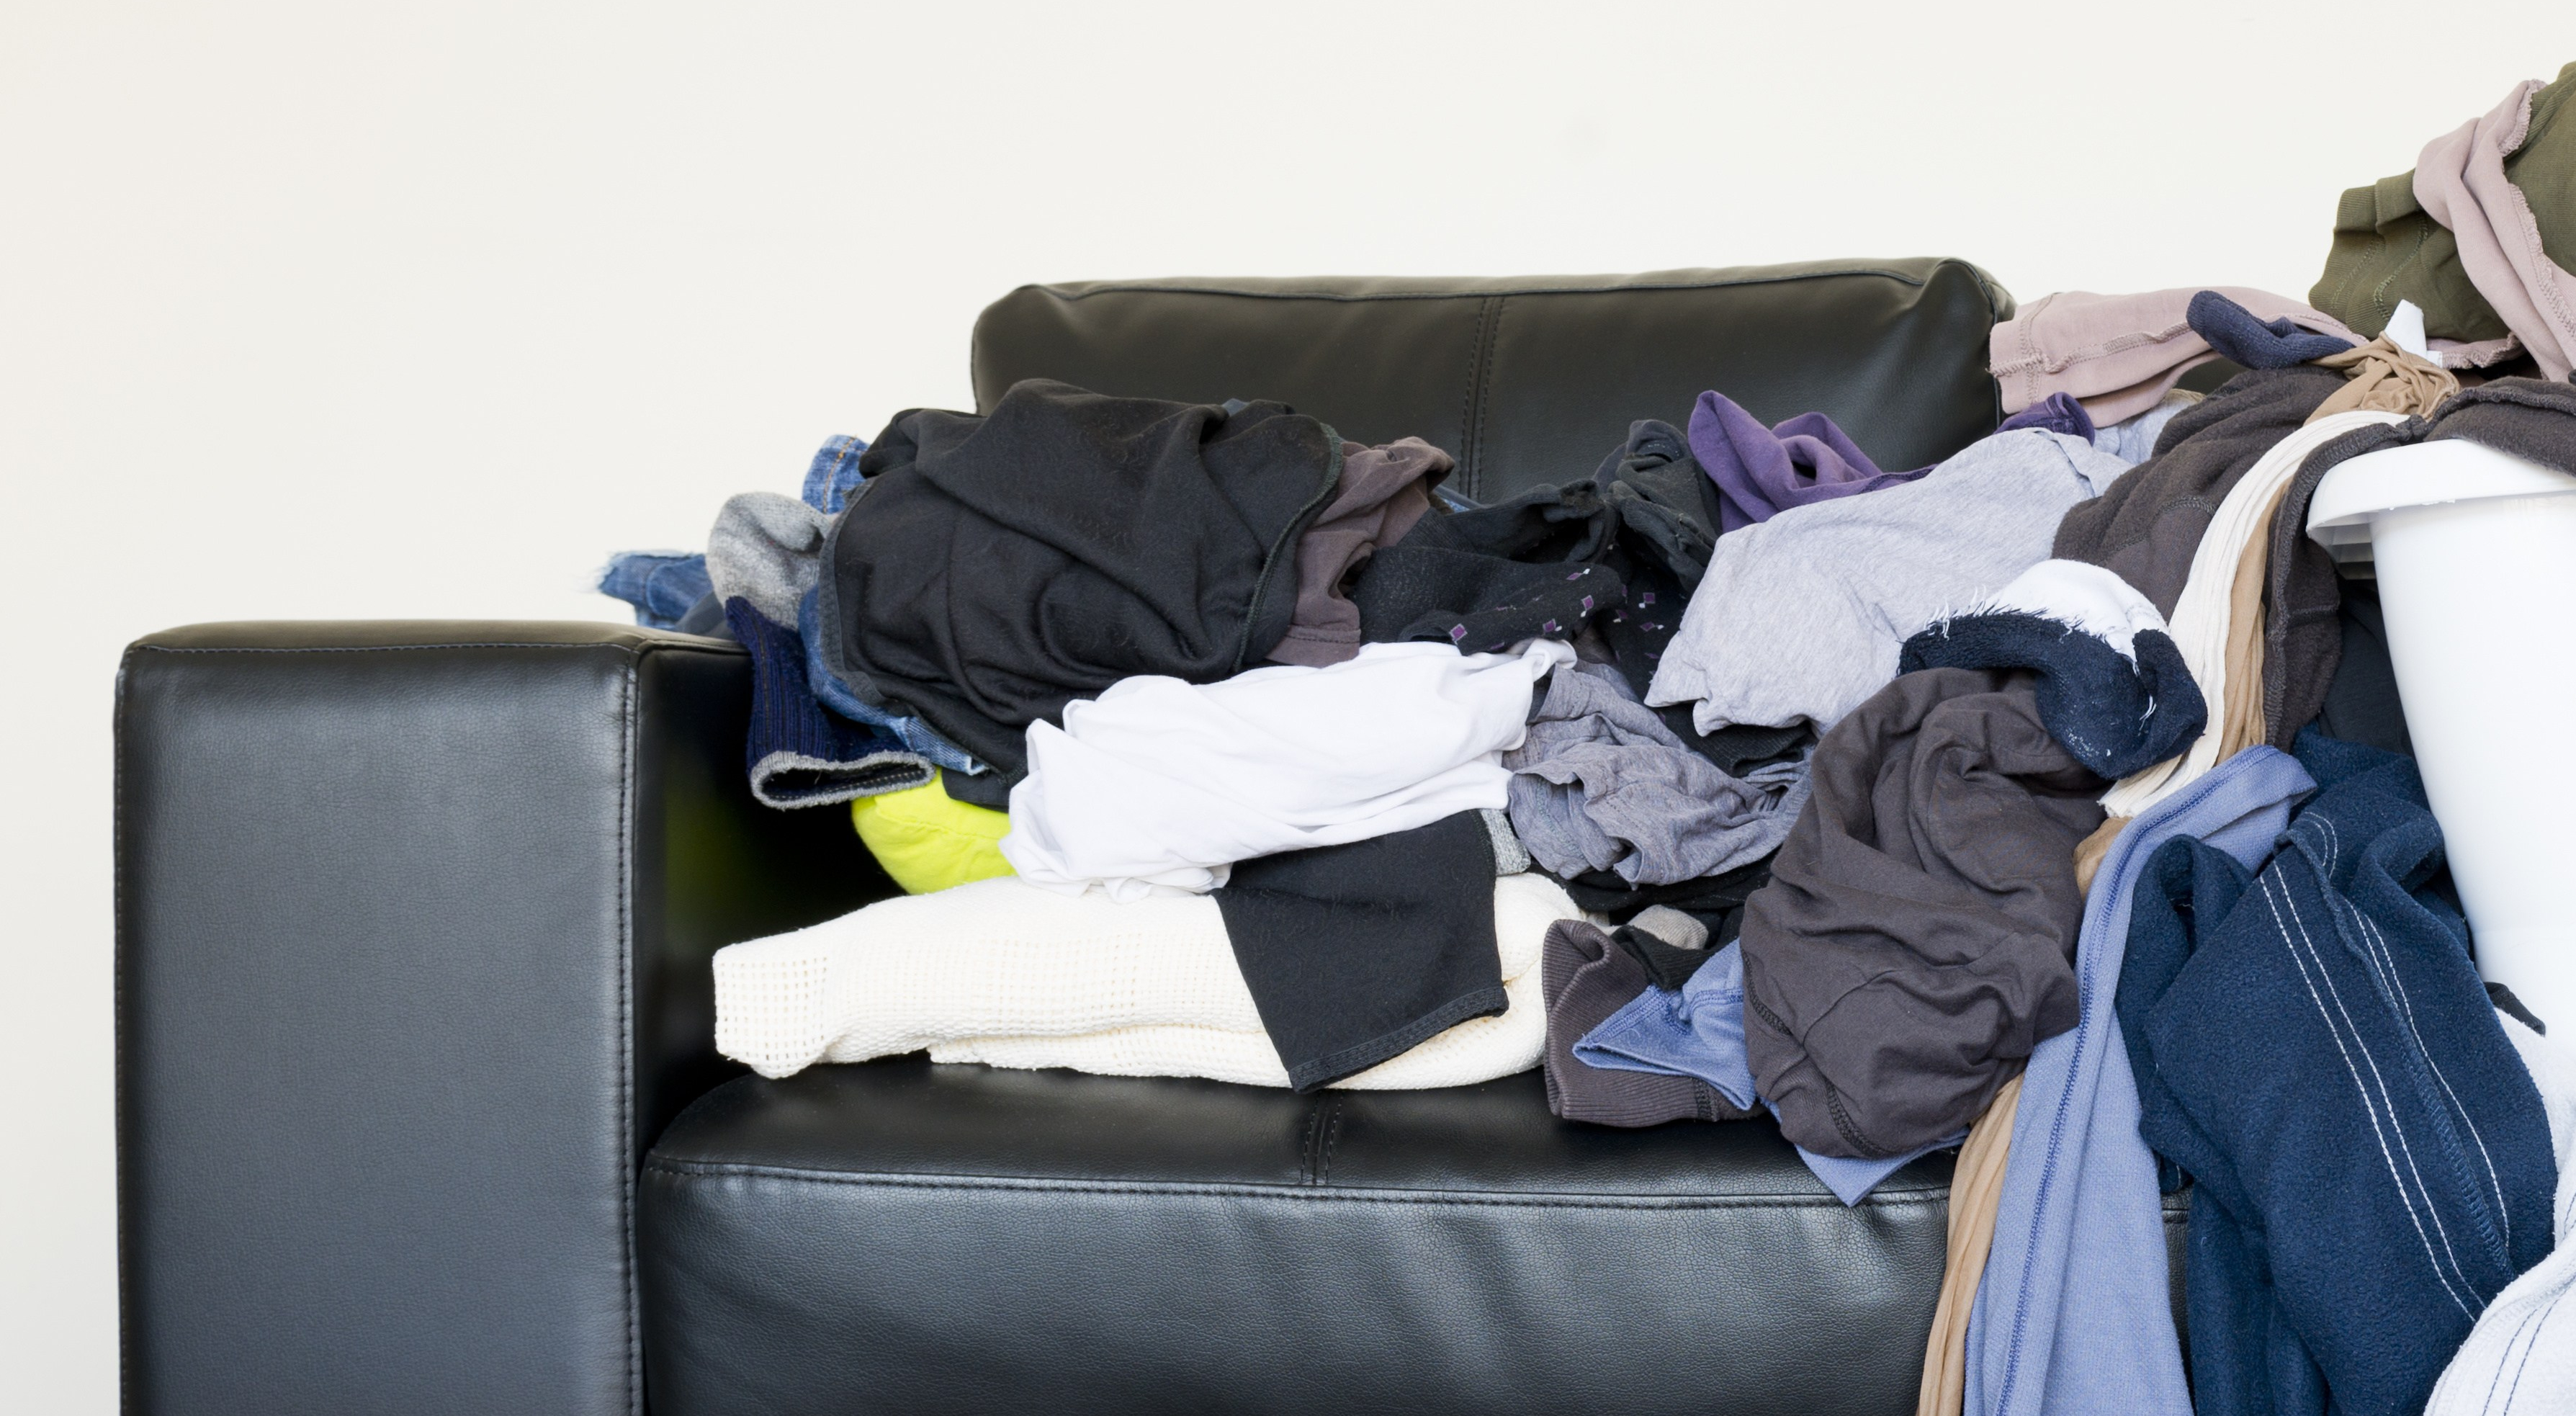 laundry piled on couch